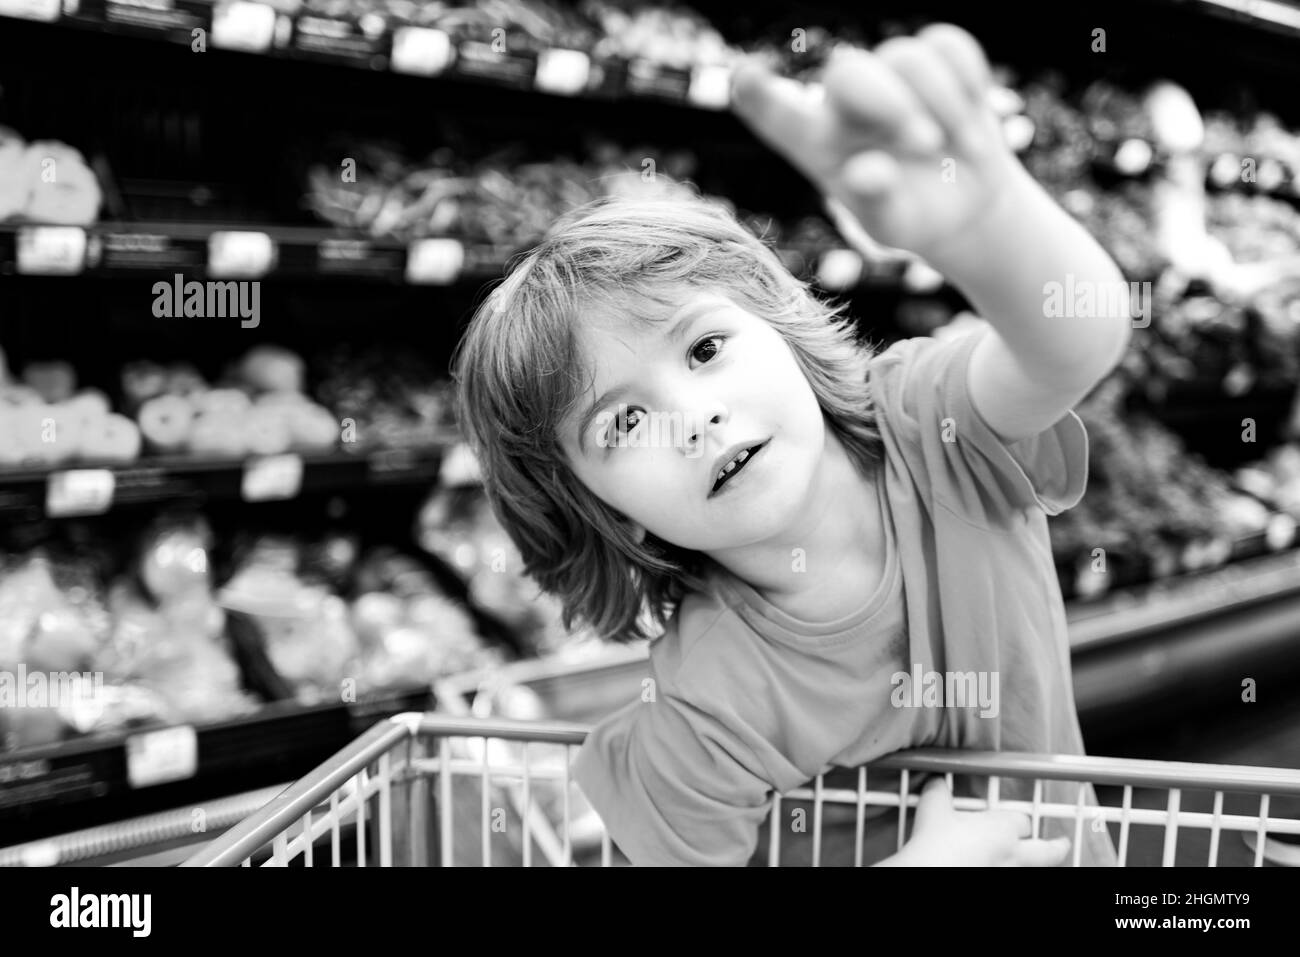 Sale, consumerism and people concept - kids with food in shopping cart at grocery store. Stock Photo